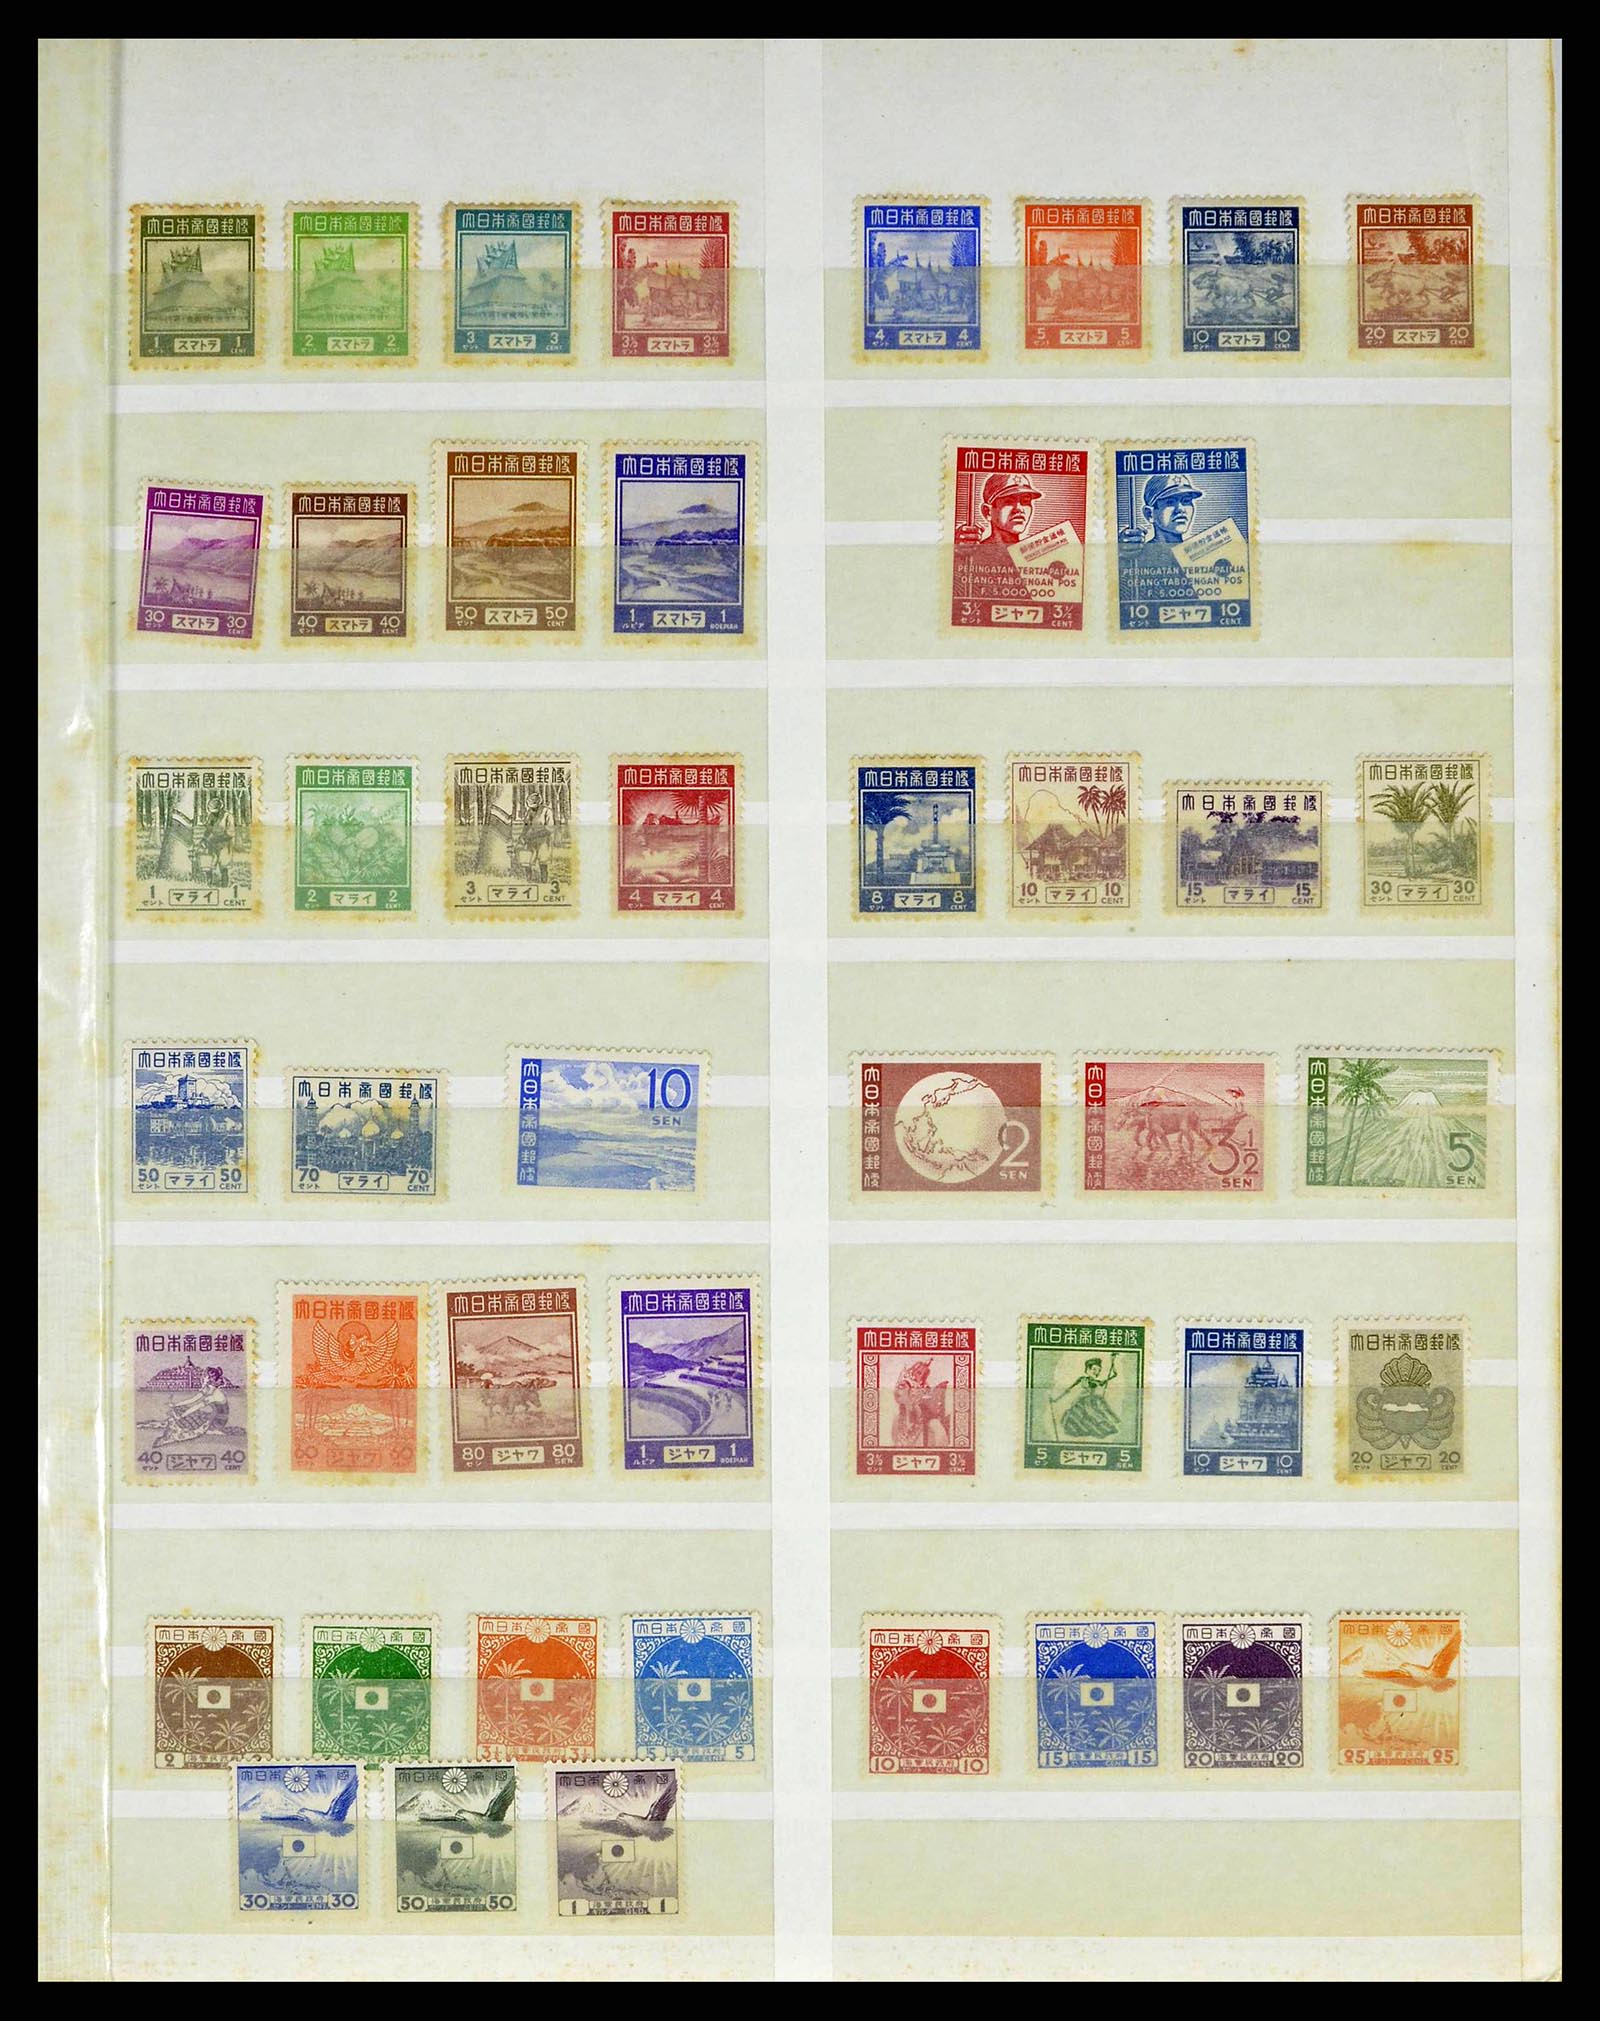 38601 0086 - Stamp collection 38601 Indonesia 1949-2007.